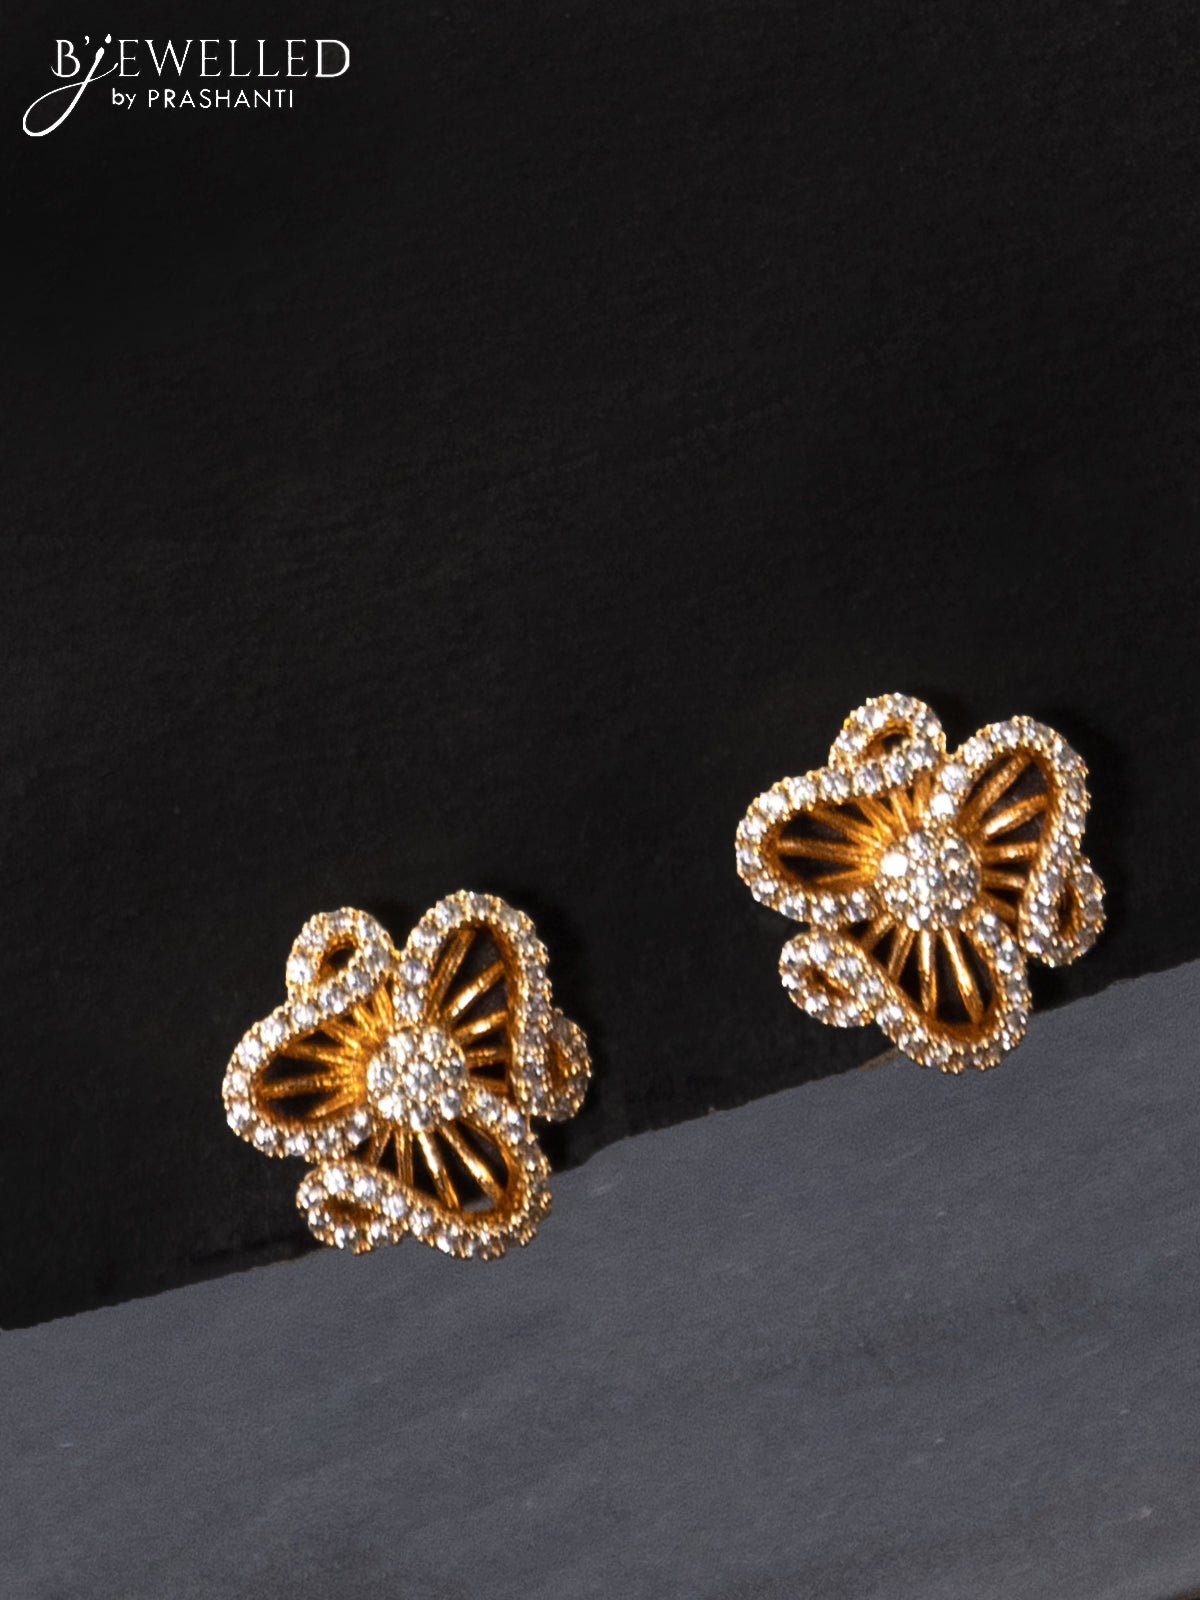 Rose Gold Earrings for Wedding | FashionCrab.com | Rose gold earrings, Bold  statement jewelry, Gold earrings